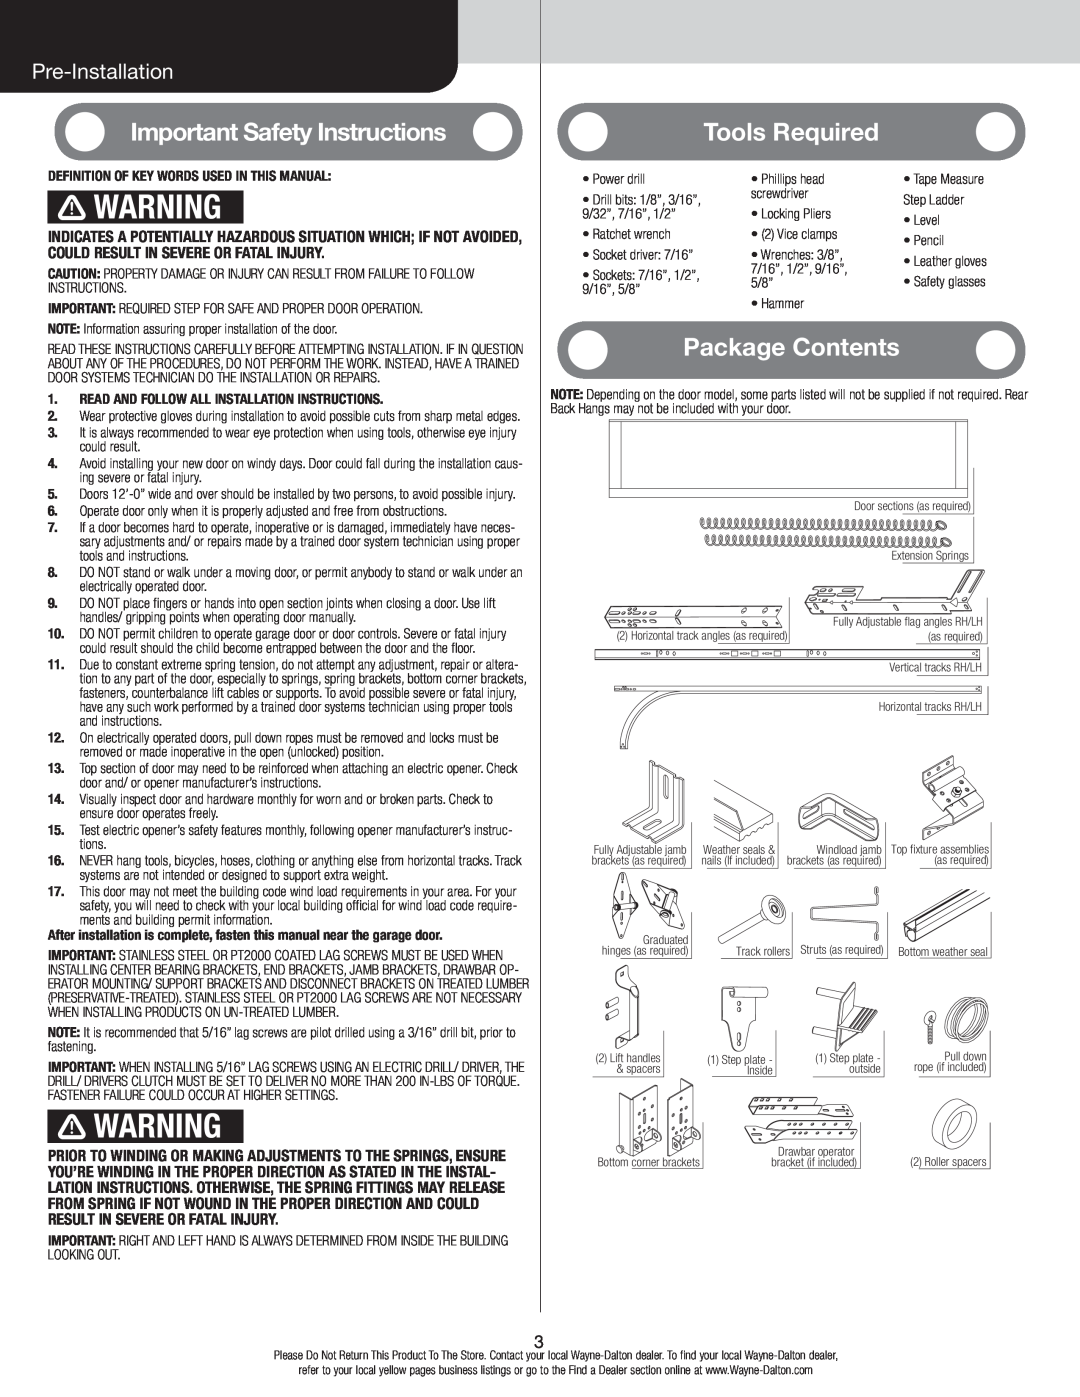 Wayne-Dalton 8700 Important Safety Instructions, Tools Required, Package Contents, Pre-Installation 